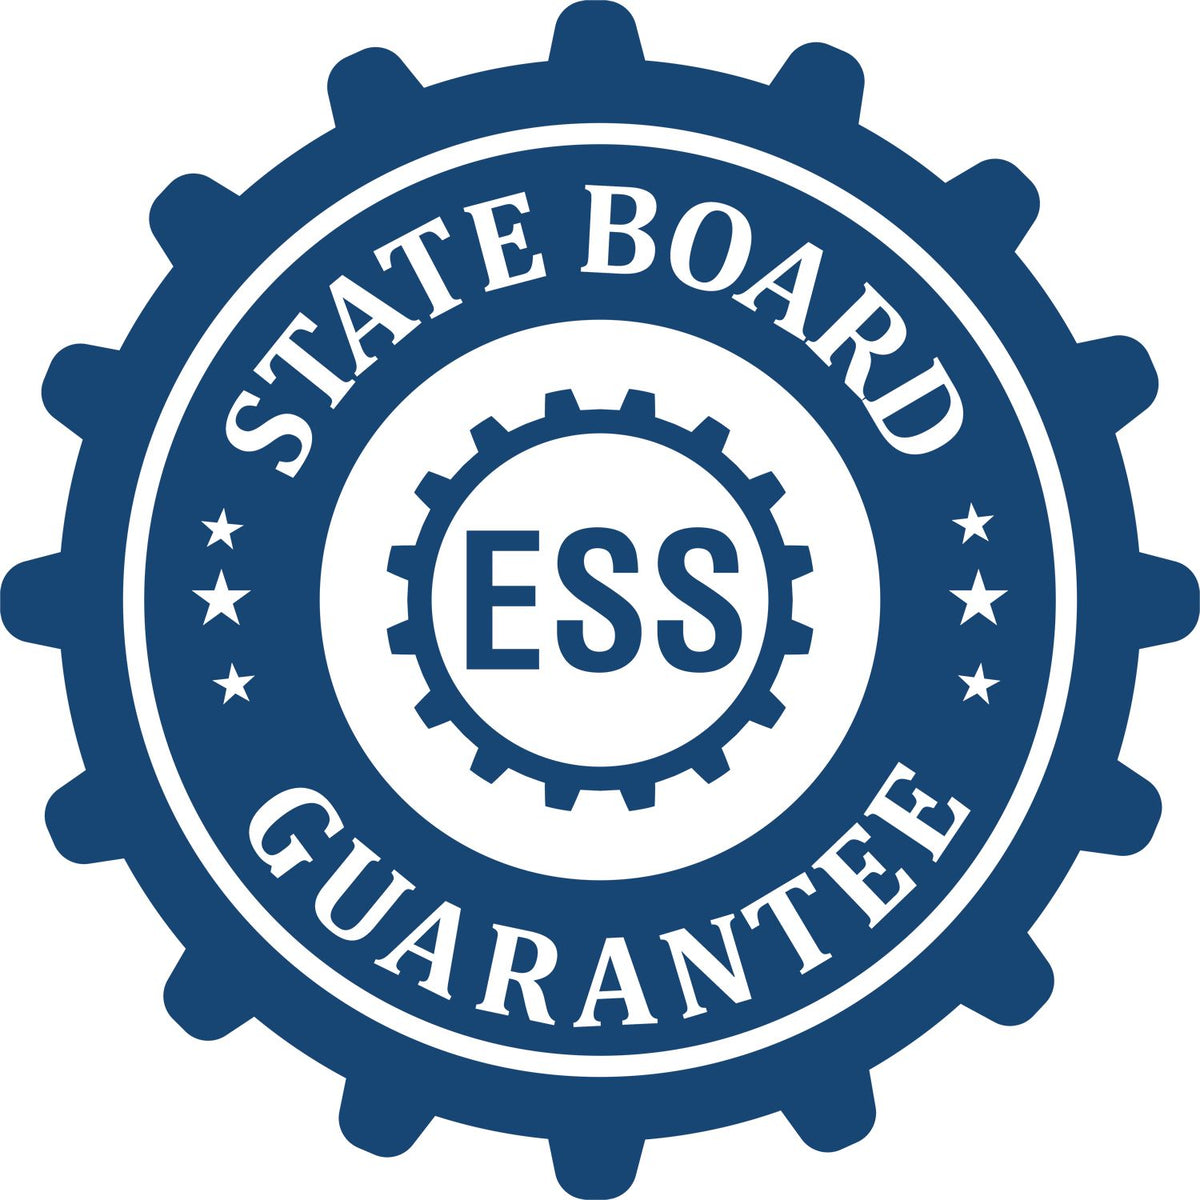 Professional Engineer eSeal Electronic Image Stamp of Seal 3008ENG State Board Guarantee